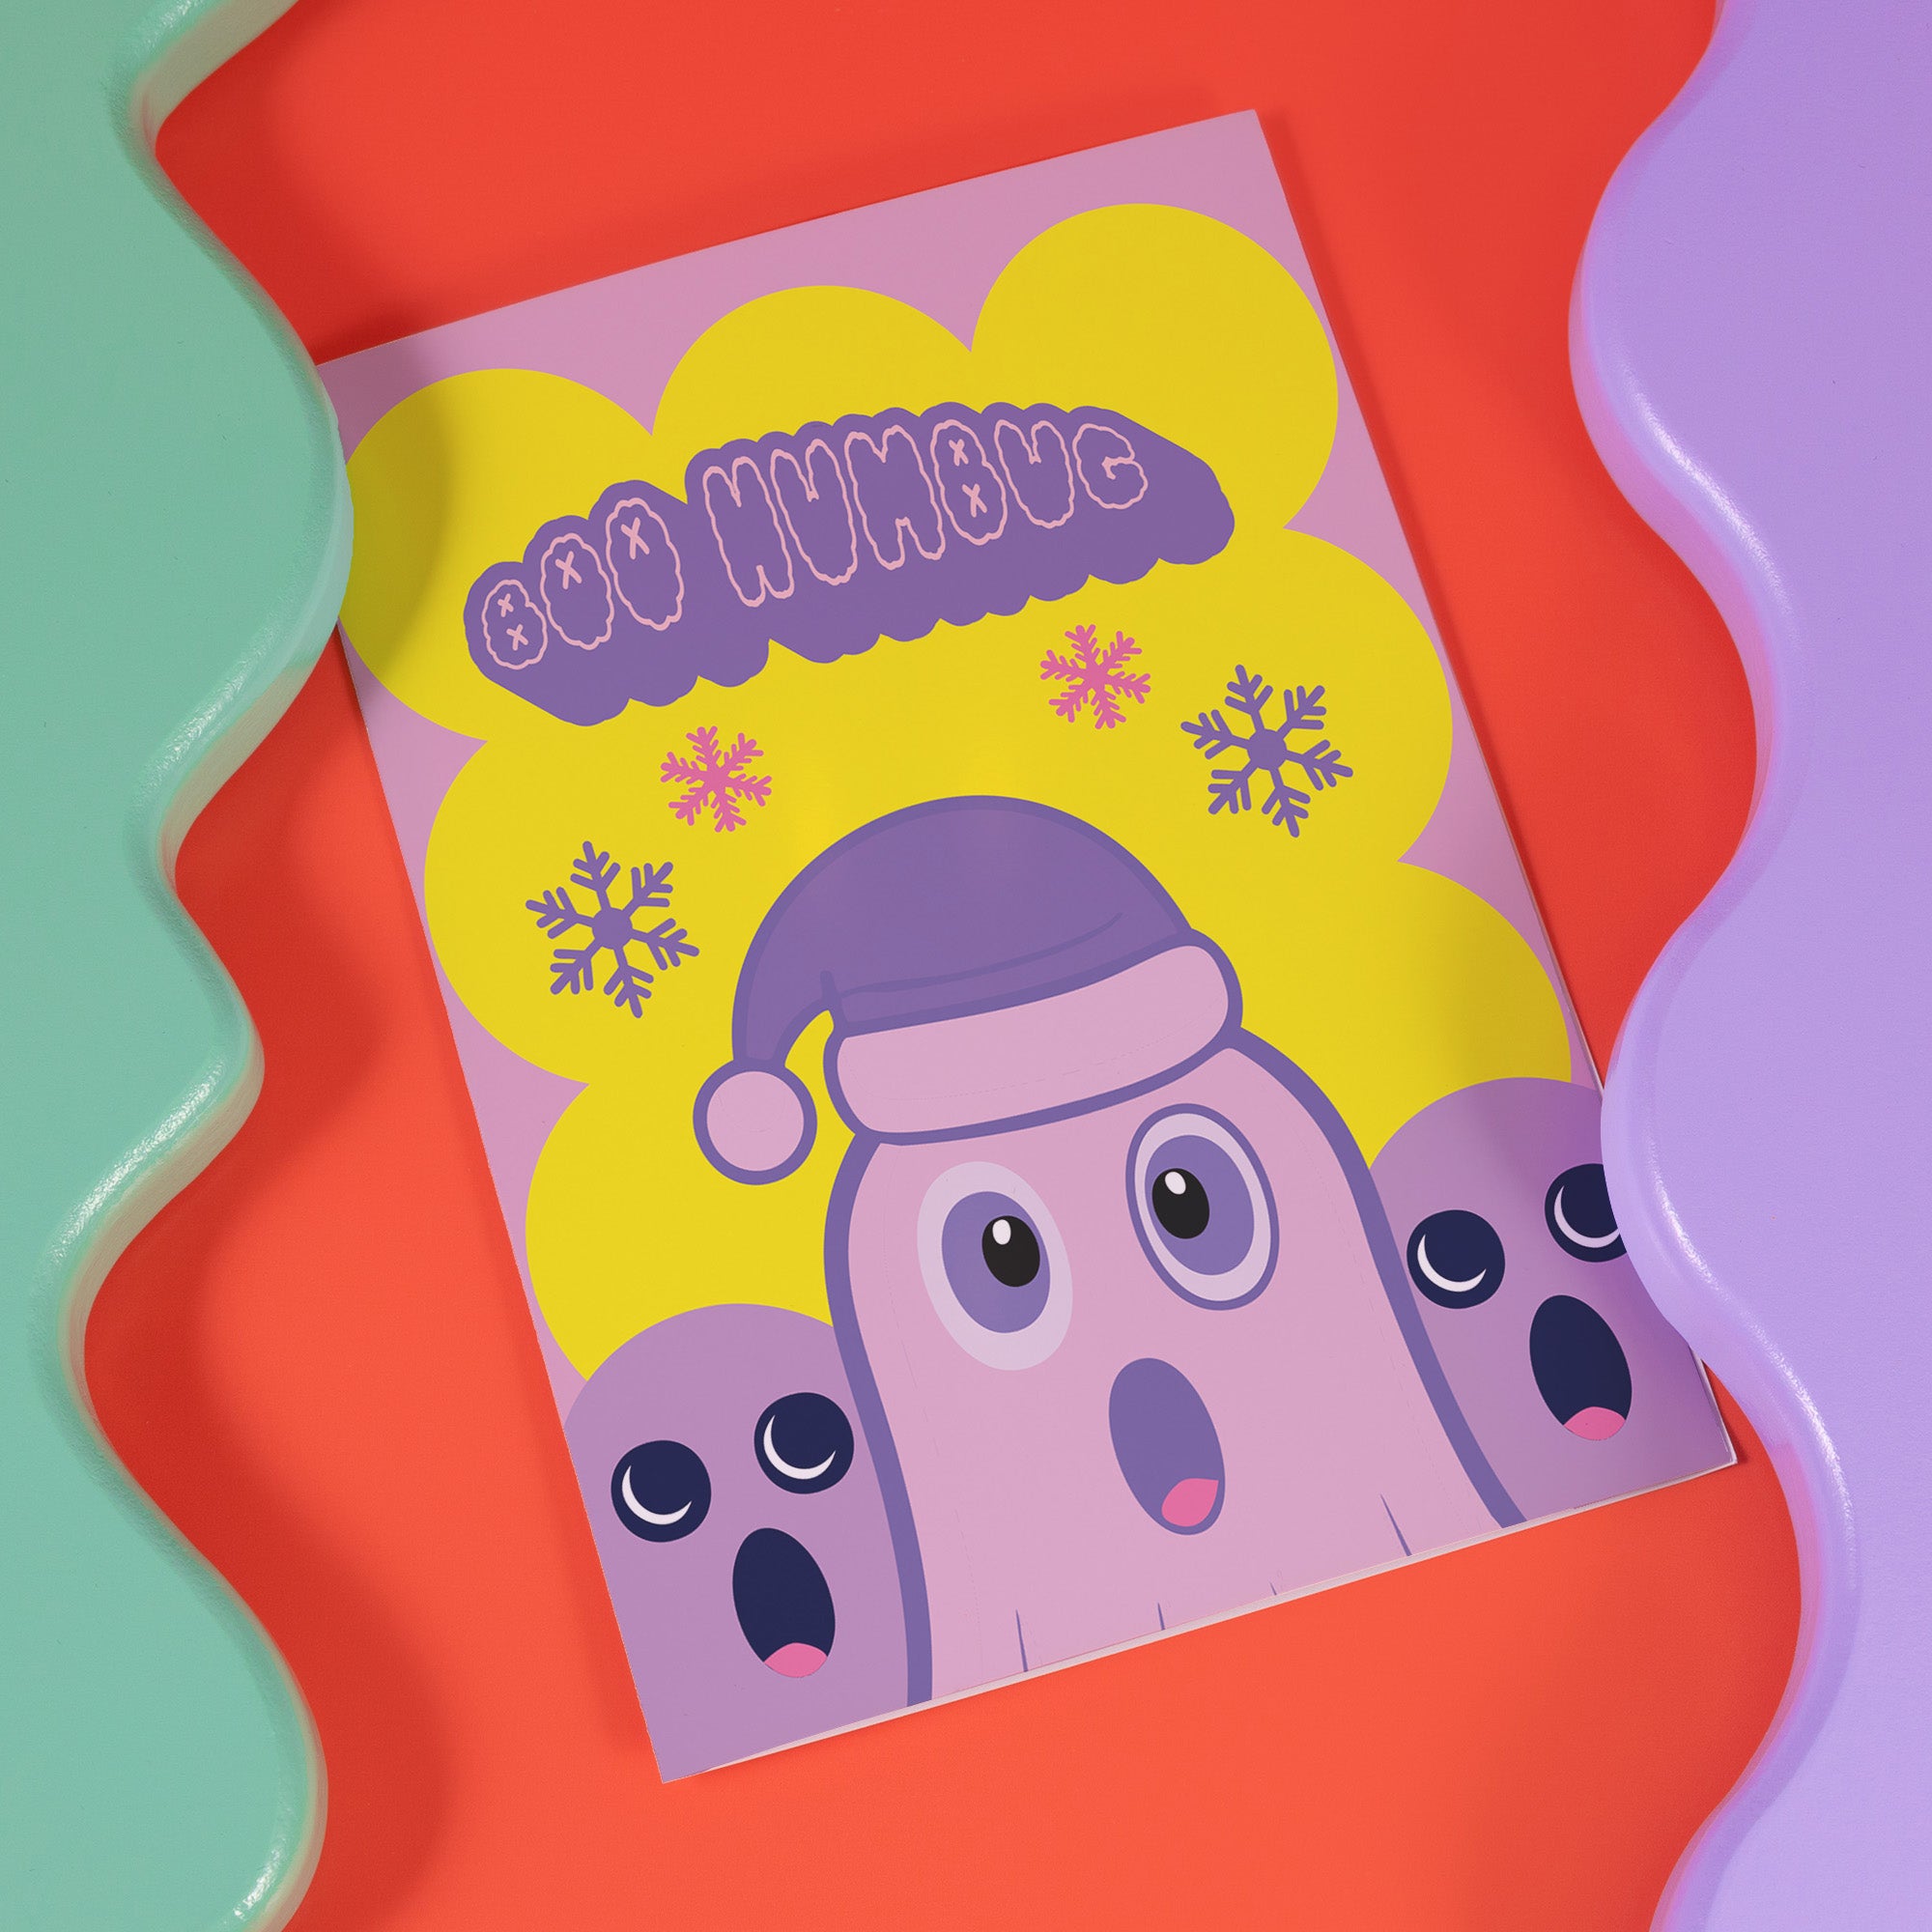 Christmas card with a playful ghost theme. Central cute pink ghost wearing a purple Santa hat, flanked by two smaller purple ghosts. Yellow background with snowflakes. Text reads 